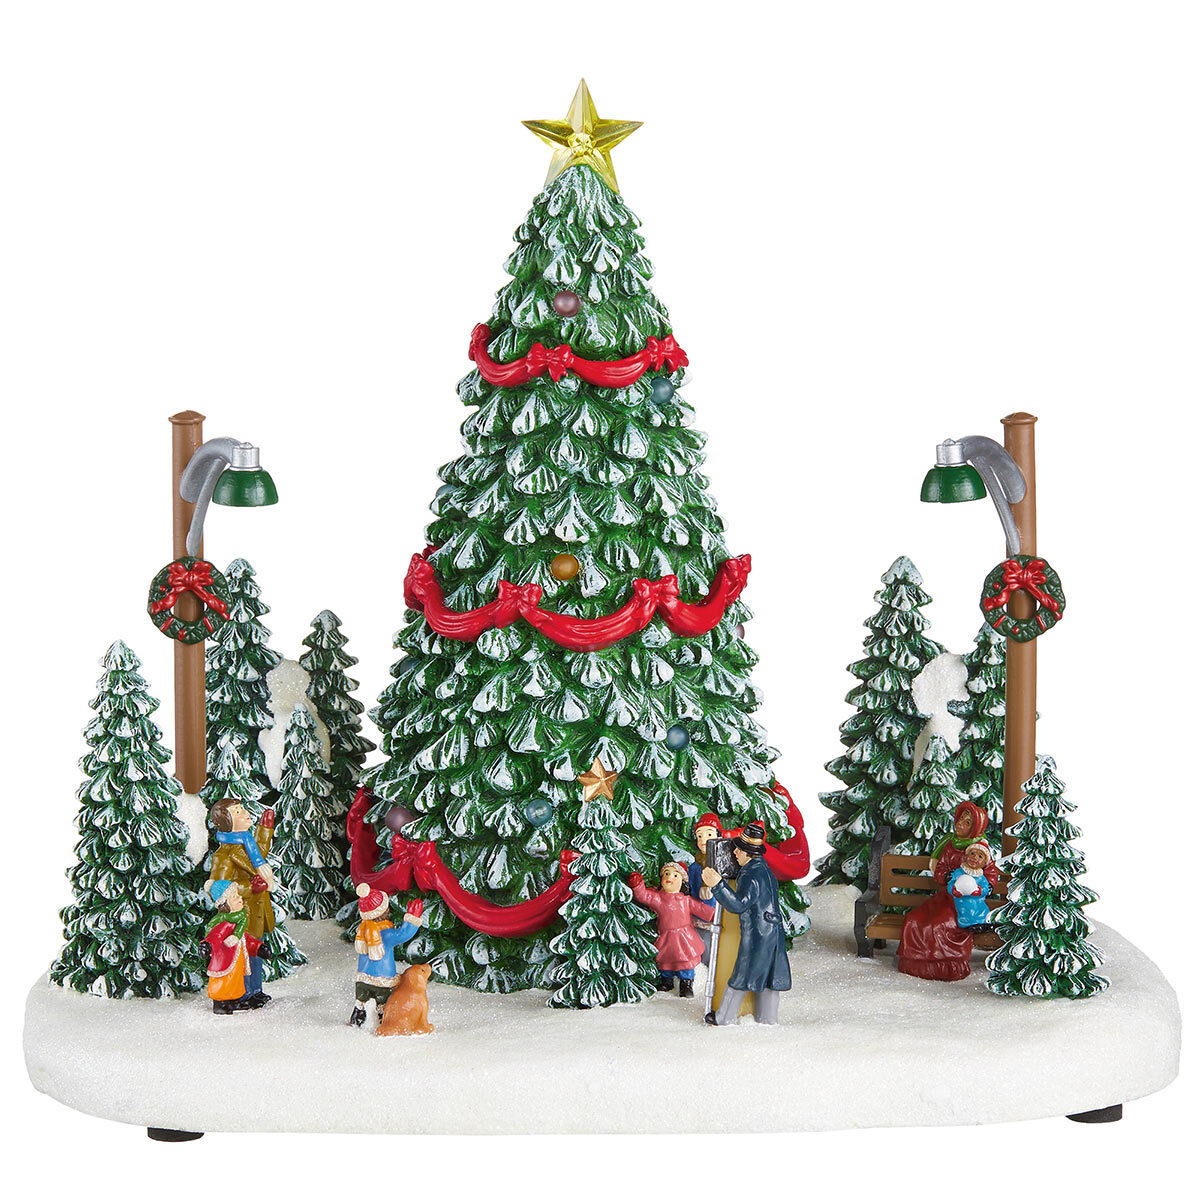 Buy Christmas Holiday Village 30 Pieces Christmas Trees Image at Costco.co.uk